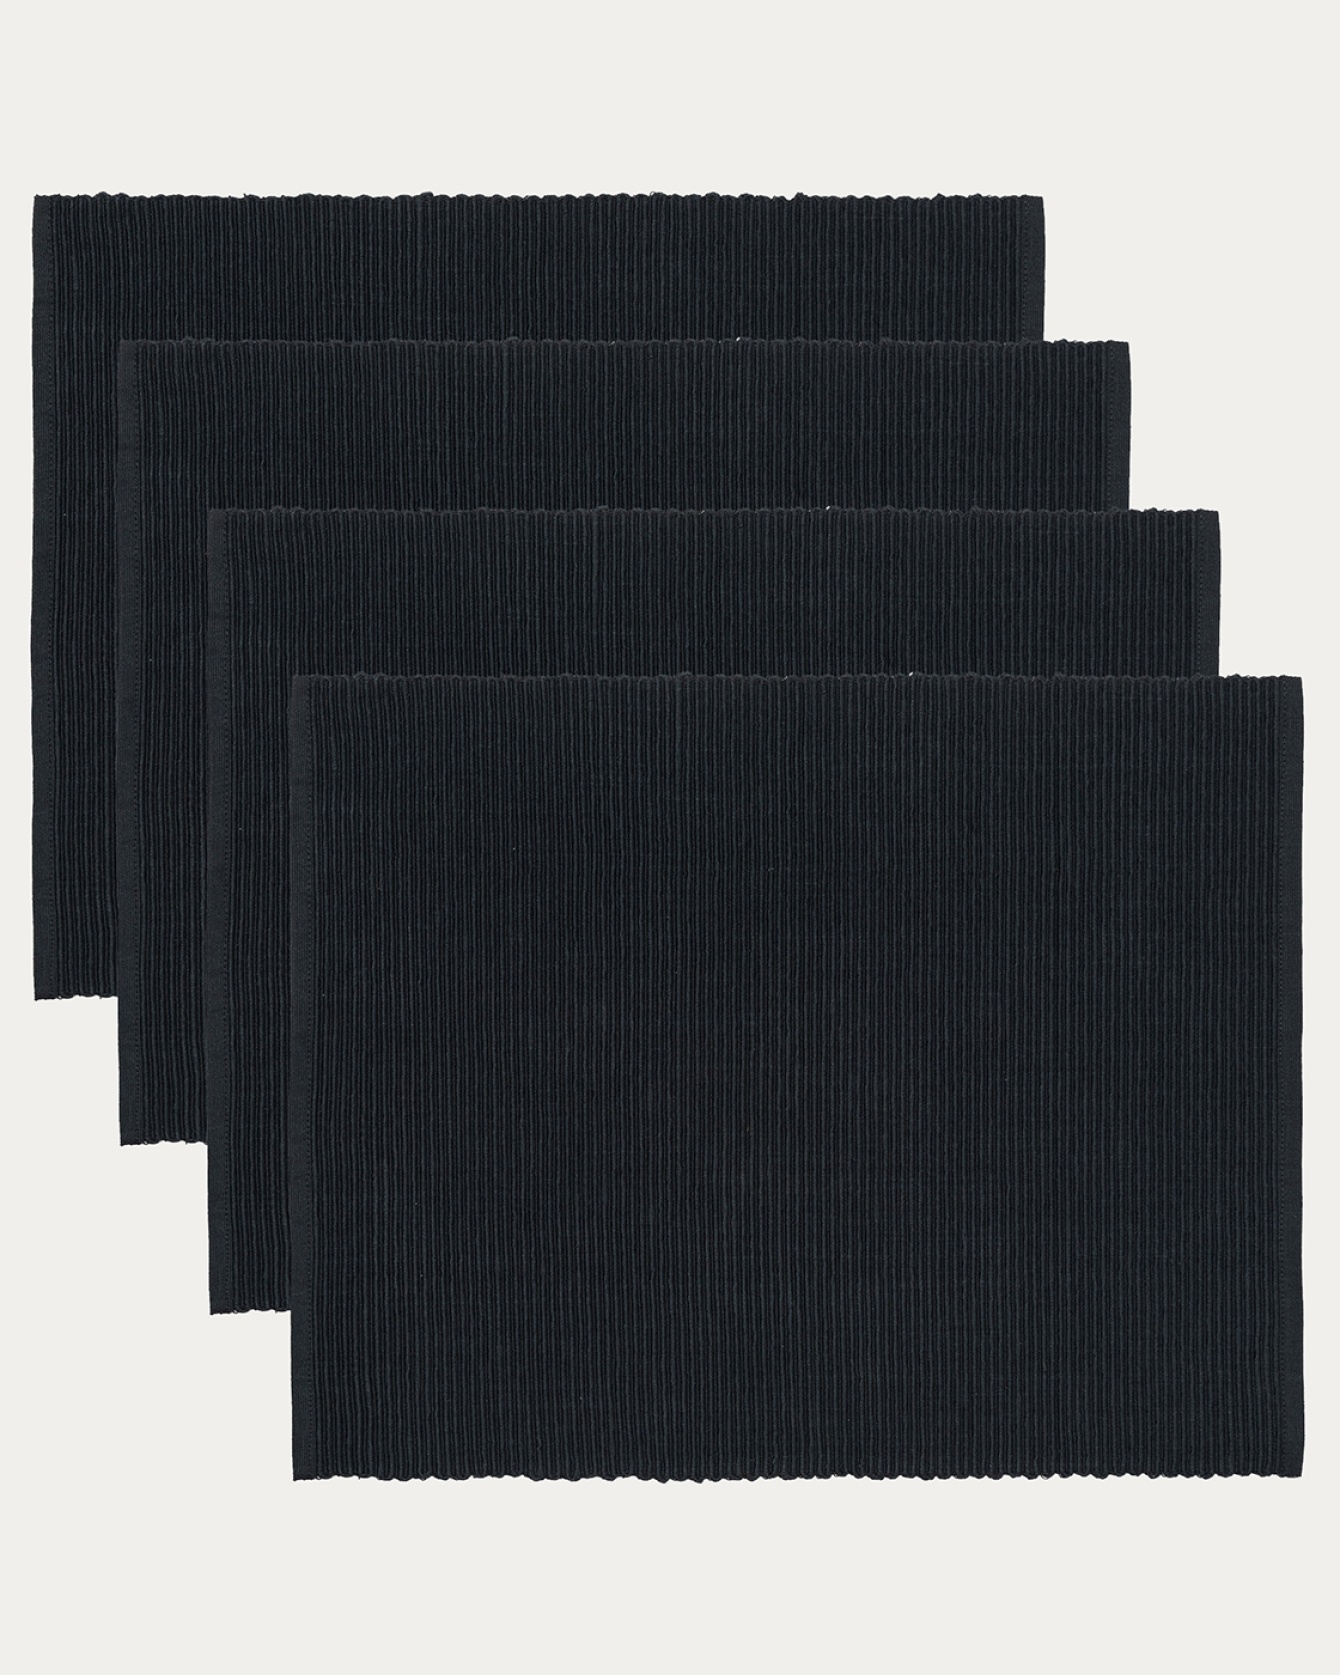 Product image black UNI placemat made of soft cotton in ribbed quality from LINUM DESIGN. Size 35x46 cm and sold in 4-pack.